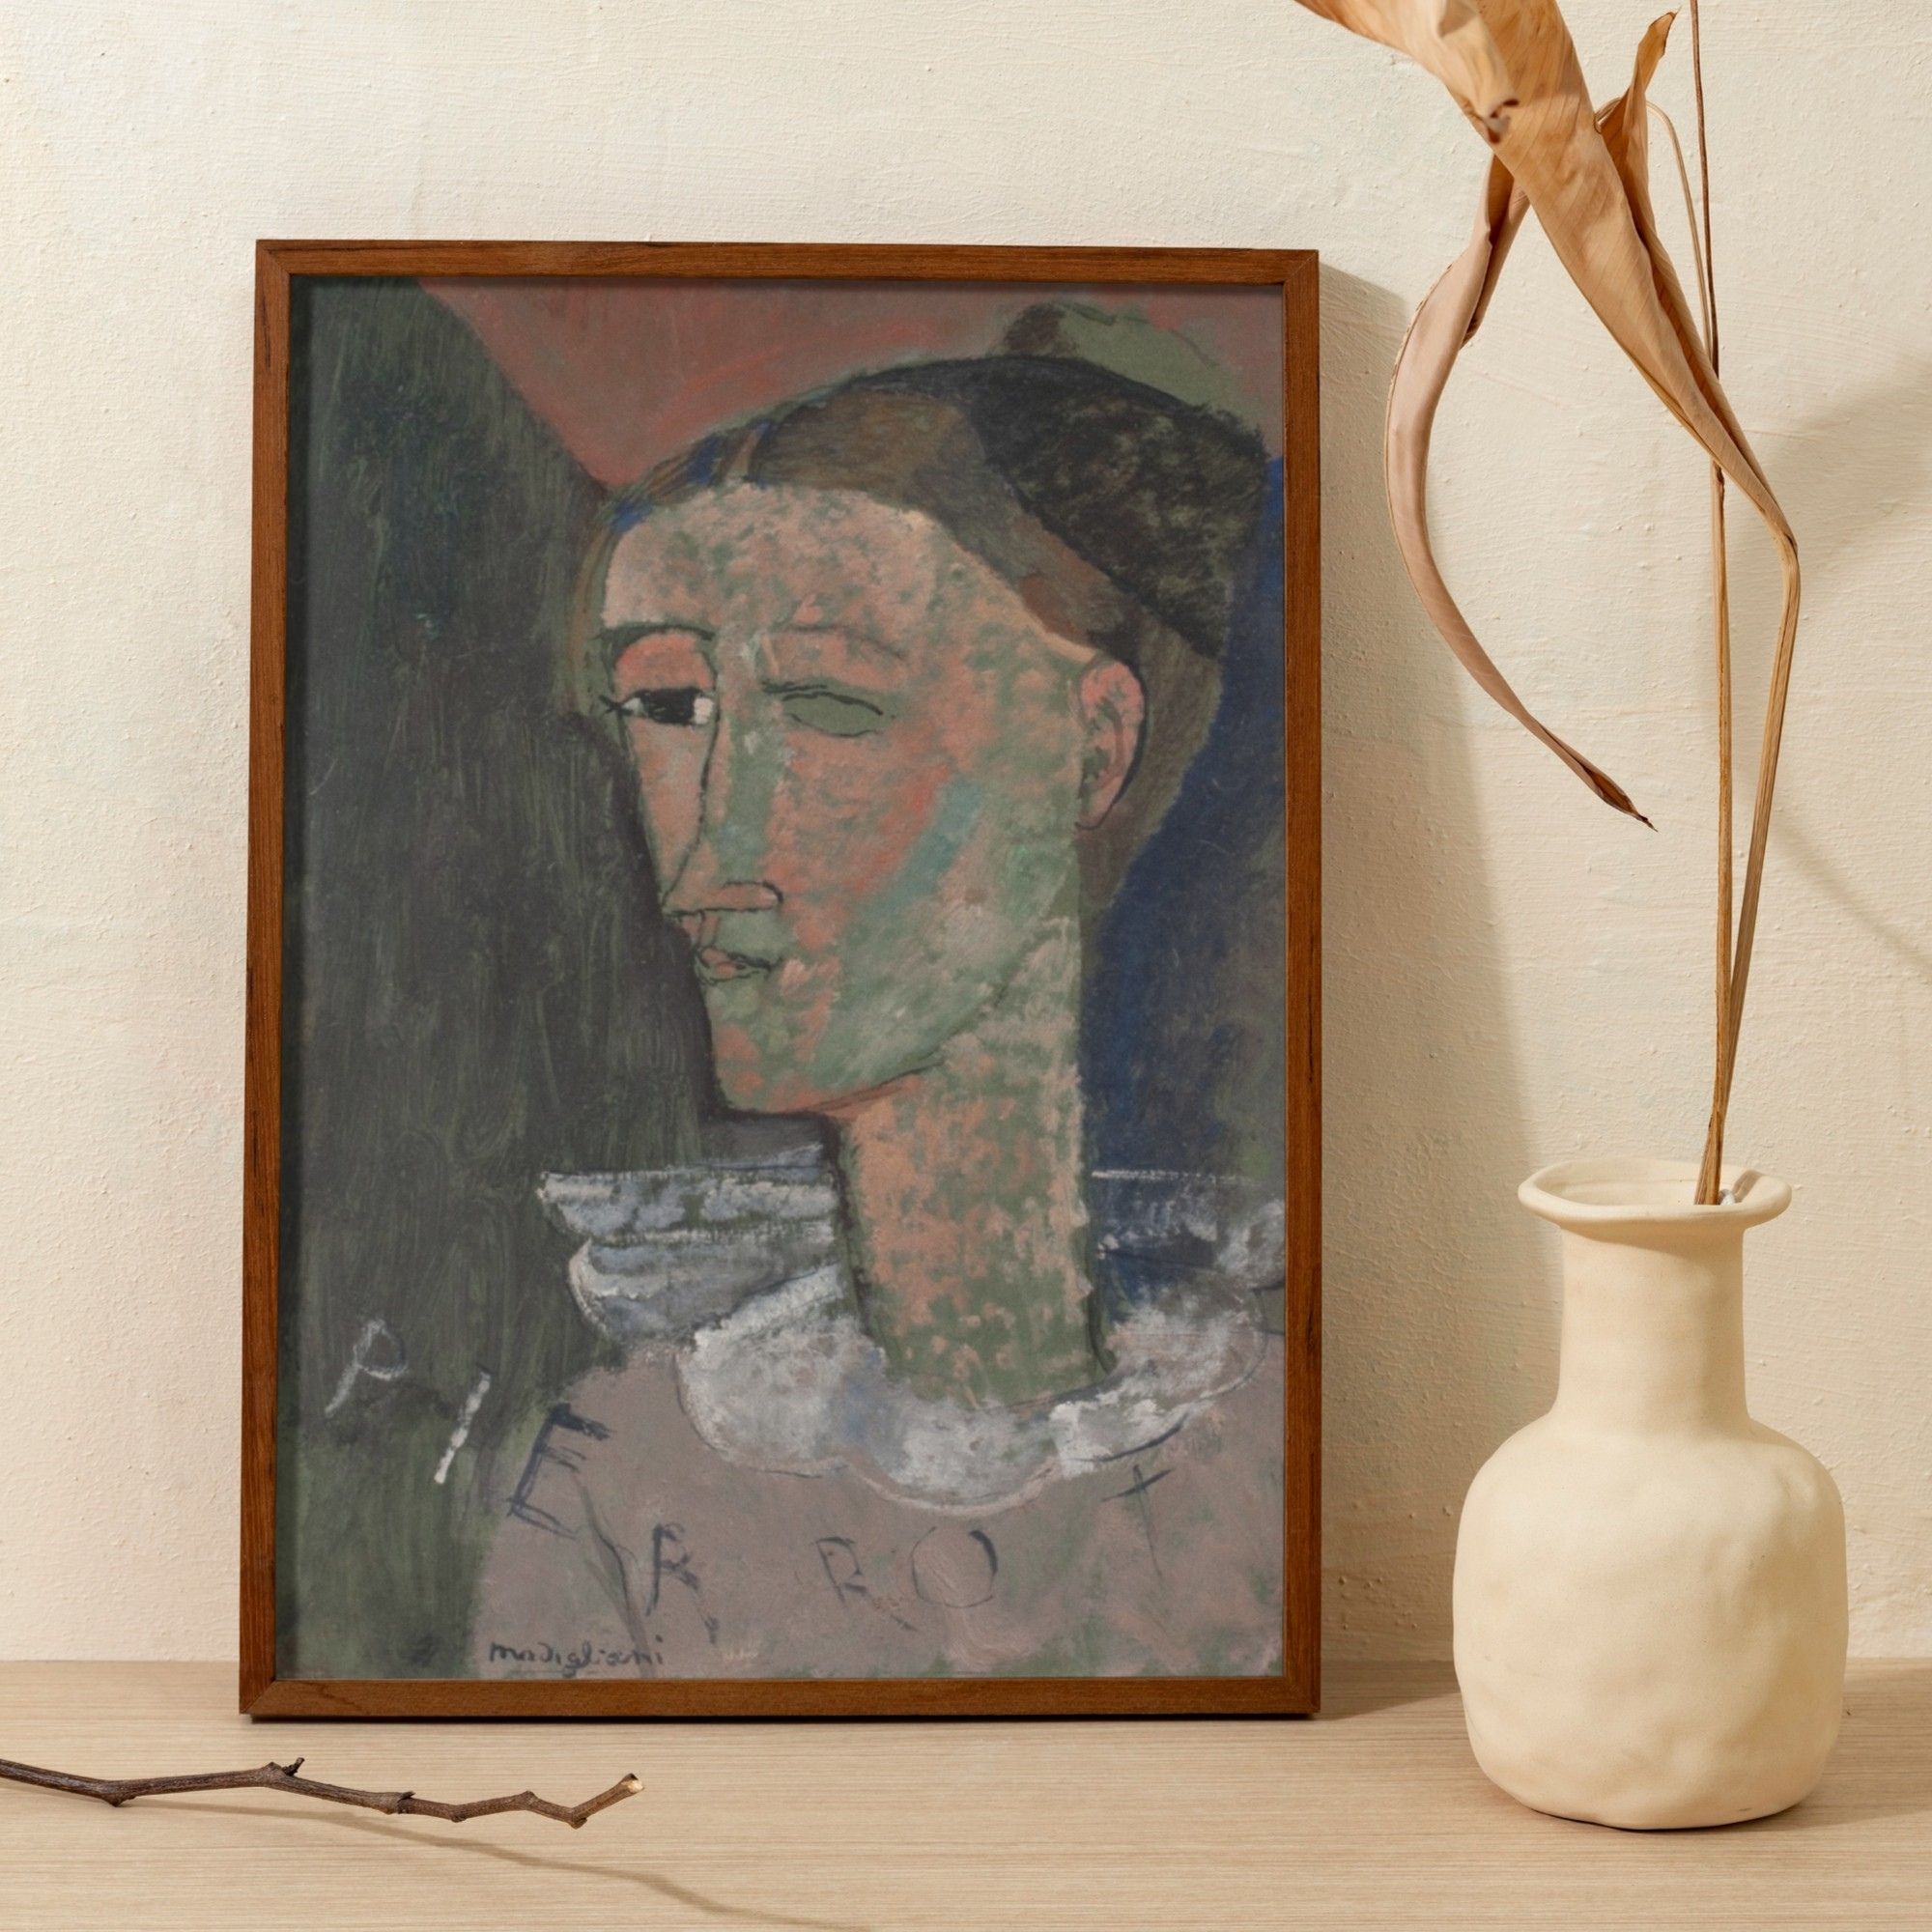 Amedeo Modigliani's self-portrait as Pierrot, showing the artist's interpretation of the traditional comical character with abstracted and muted features set against a dark background. The painter's use of contrasting green and red patches on the face, and the inscribed word 'PIERROT' at the bottom, convey a modernist twist on the classic theme.